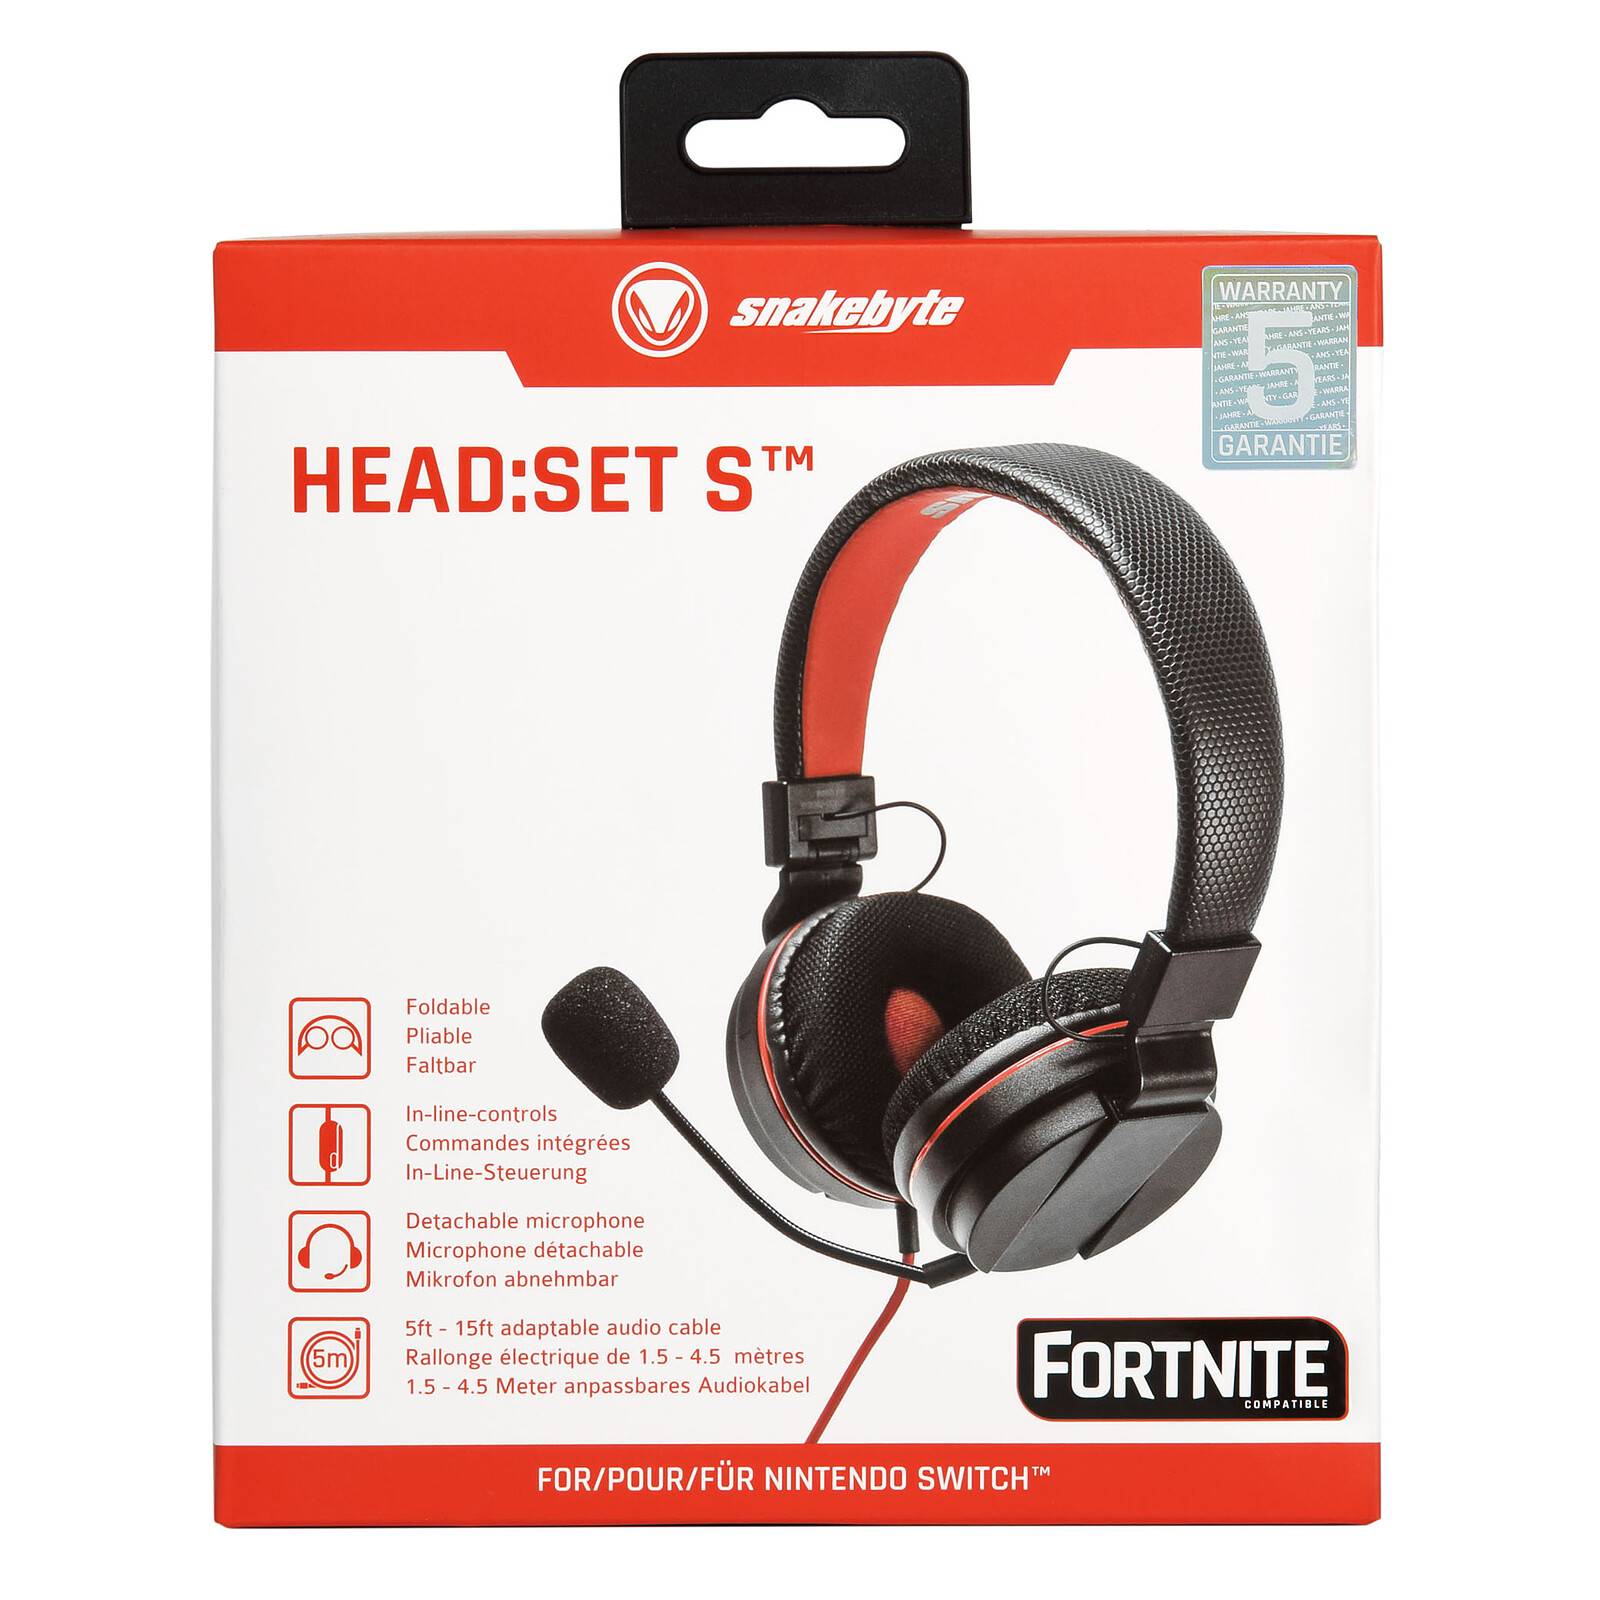 snakebyte - Casque micro pour Nintendo Switch - Accessoires Switch - LDLC